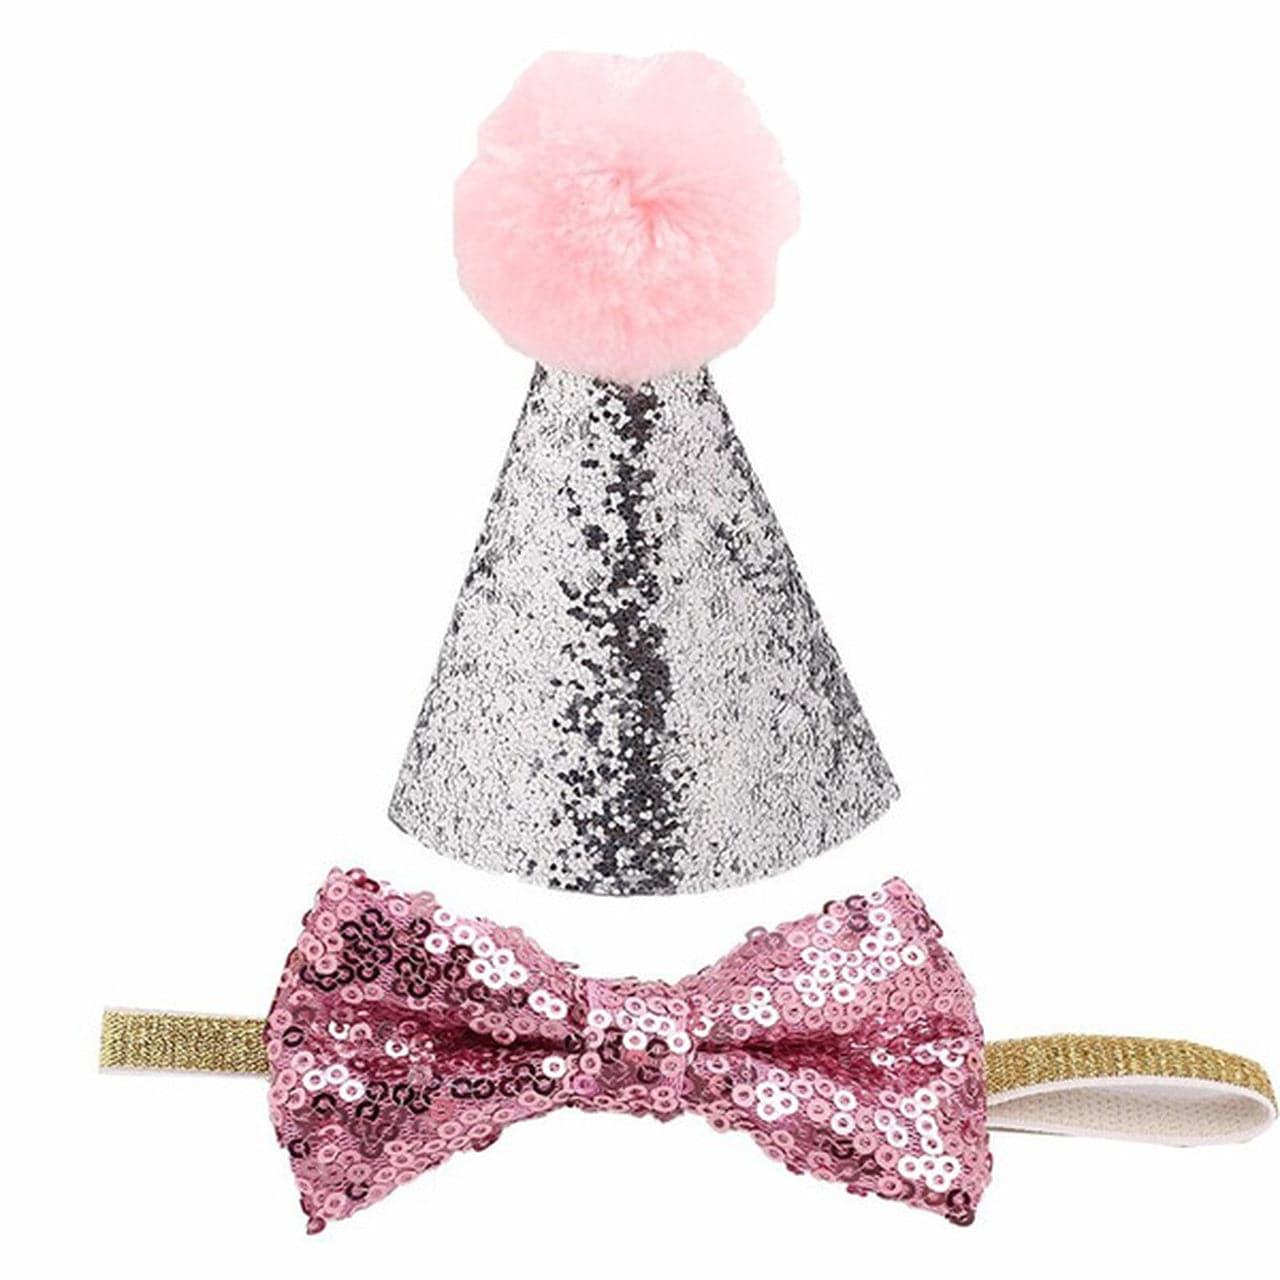 glitter party hat w bow tie pink/silver